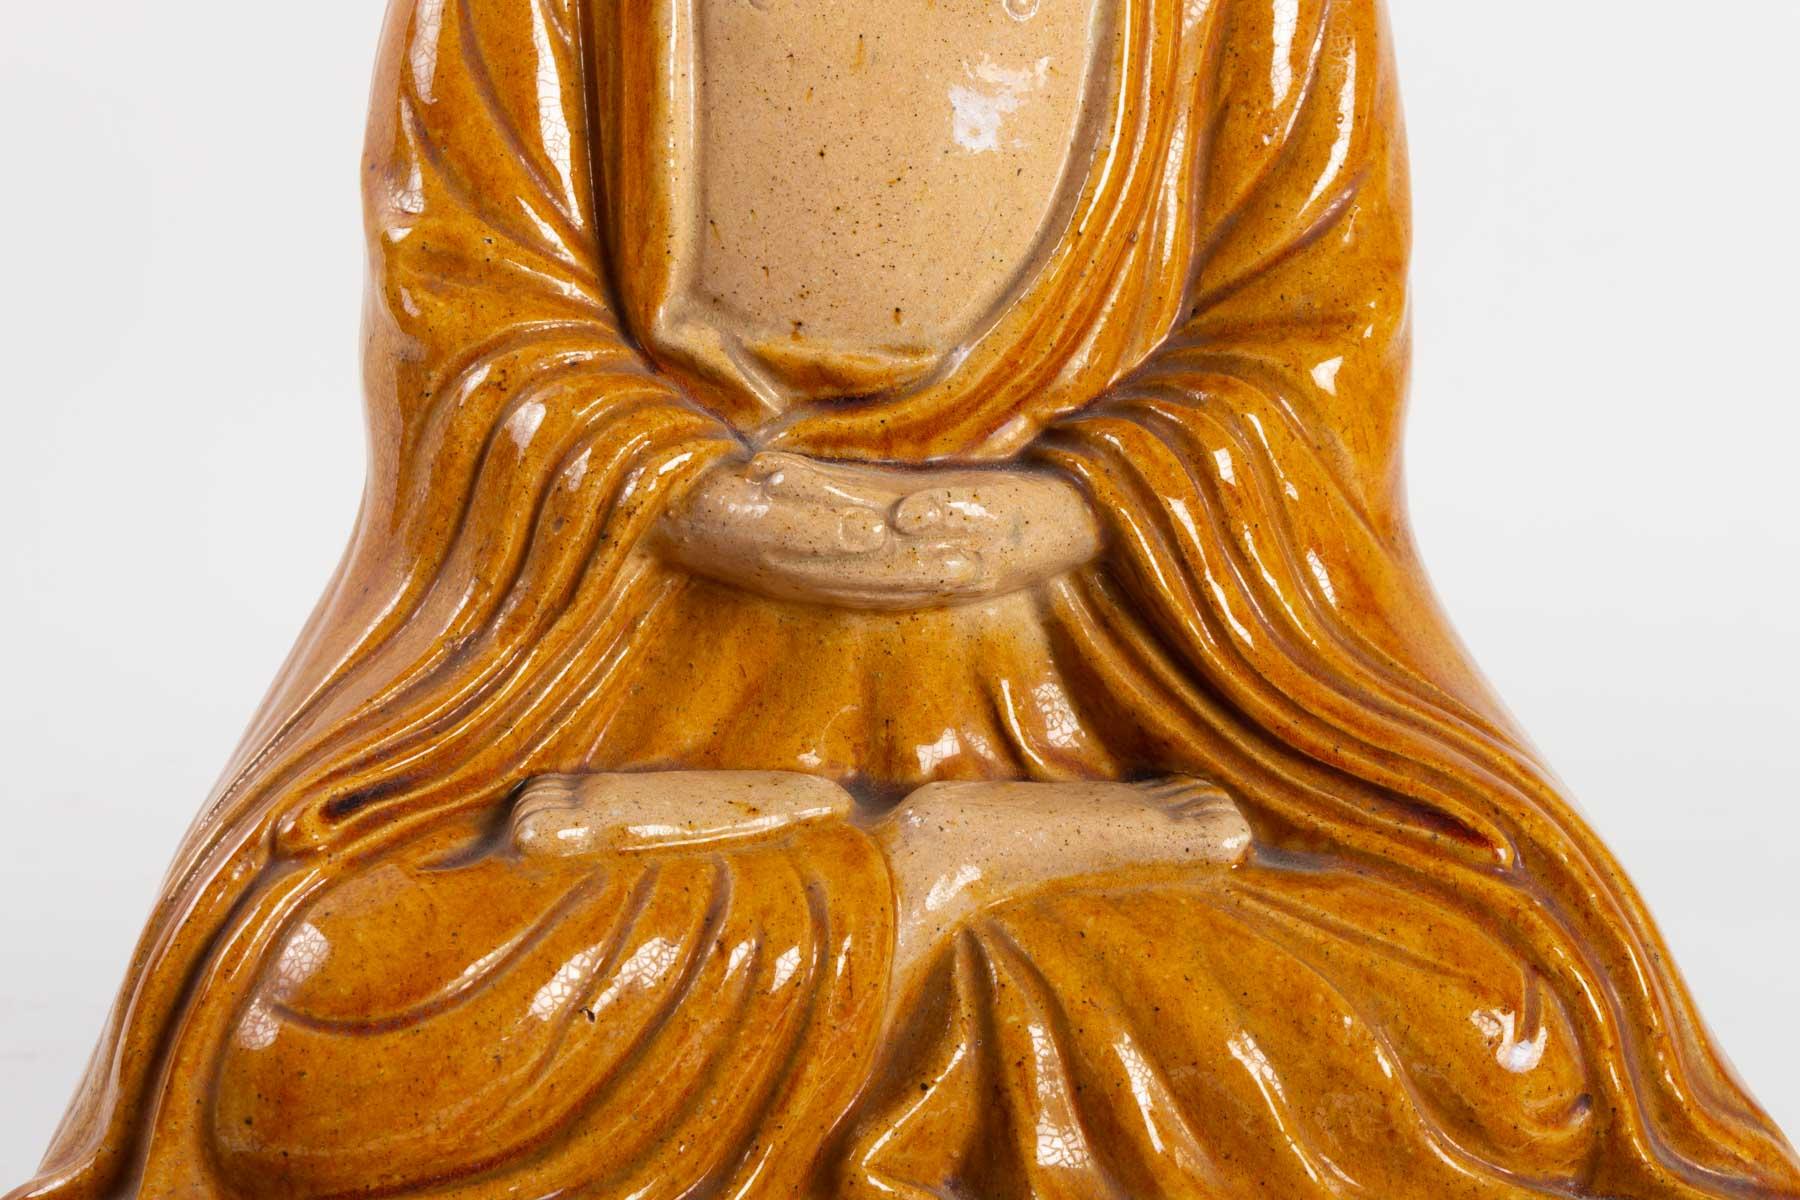 Buddha sitting on a lotus flower in enameled terracotta, yellow and green ochre, circa 1930.
Measures: H 47 cm, L 28 cm, W 20 cm.